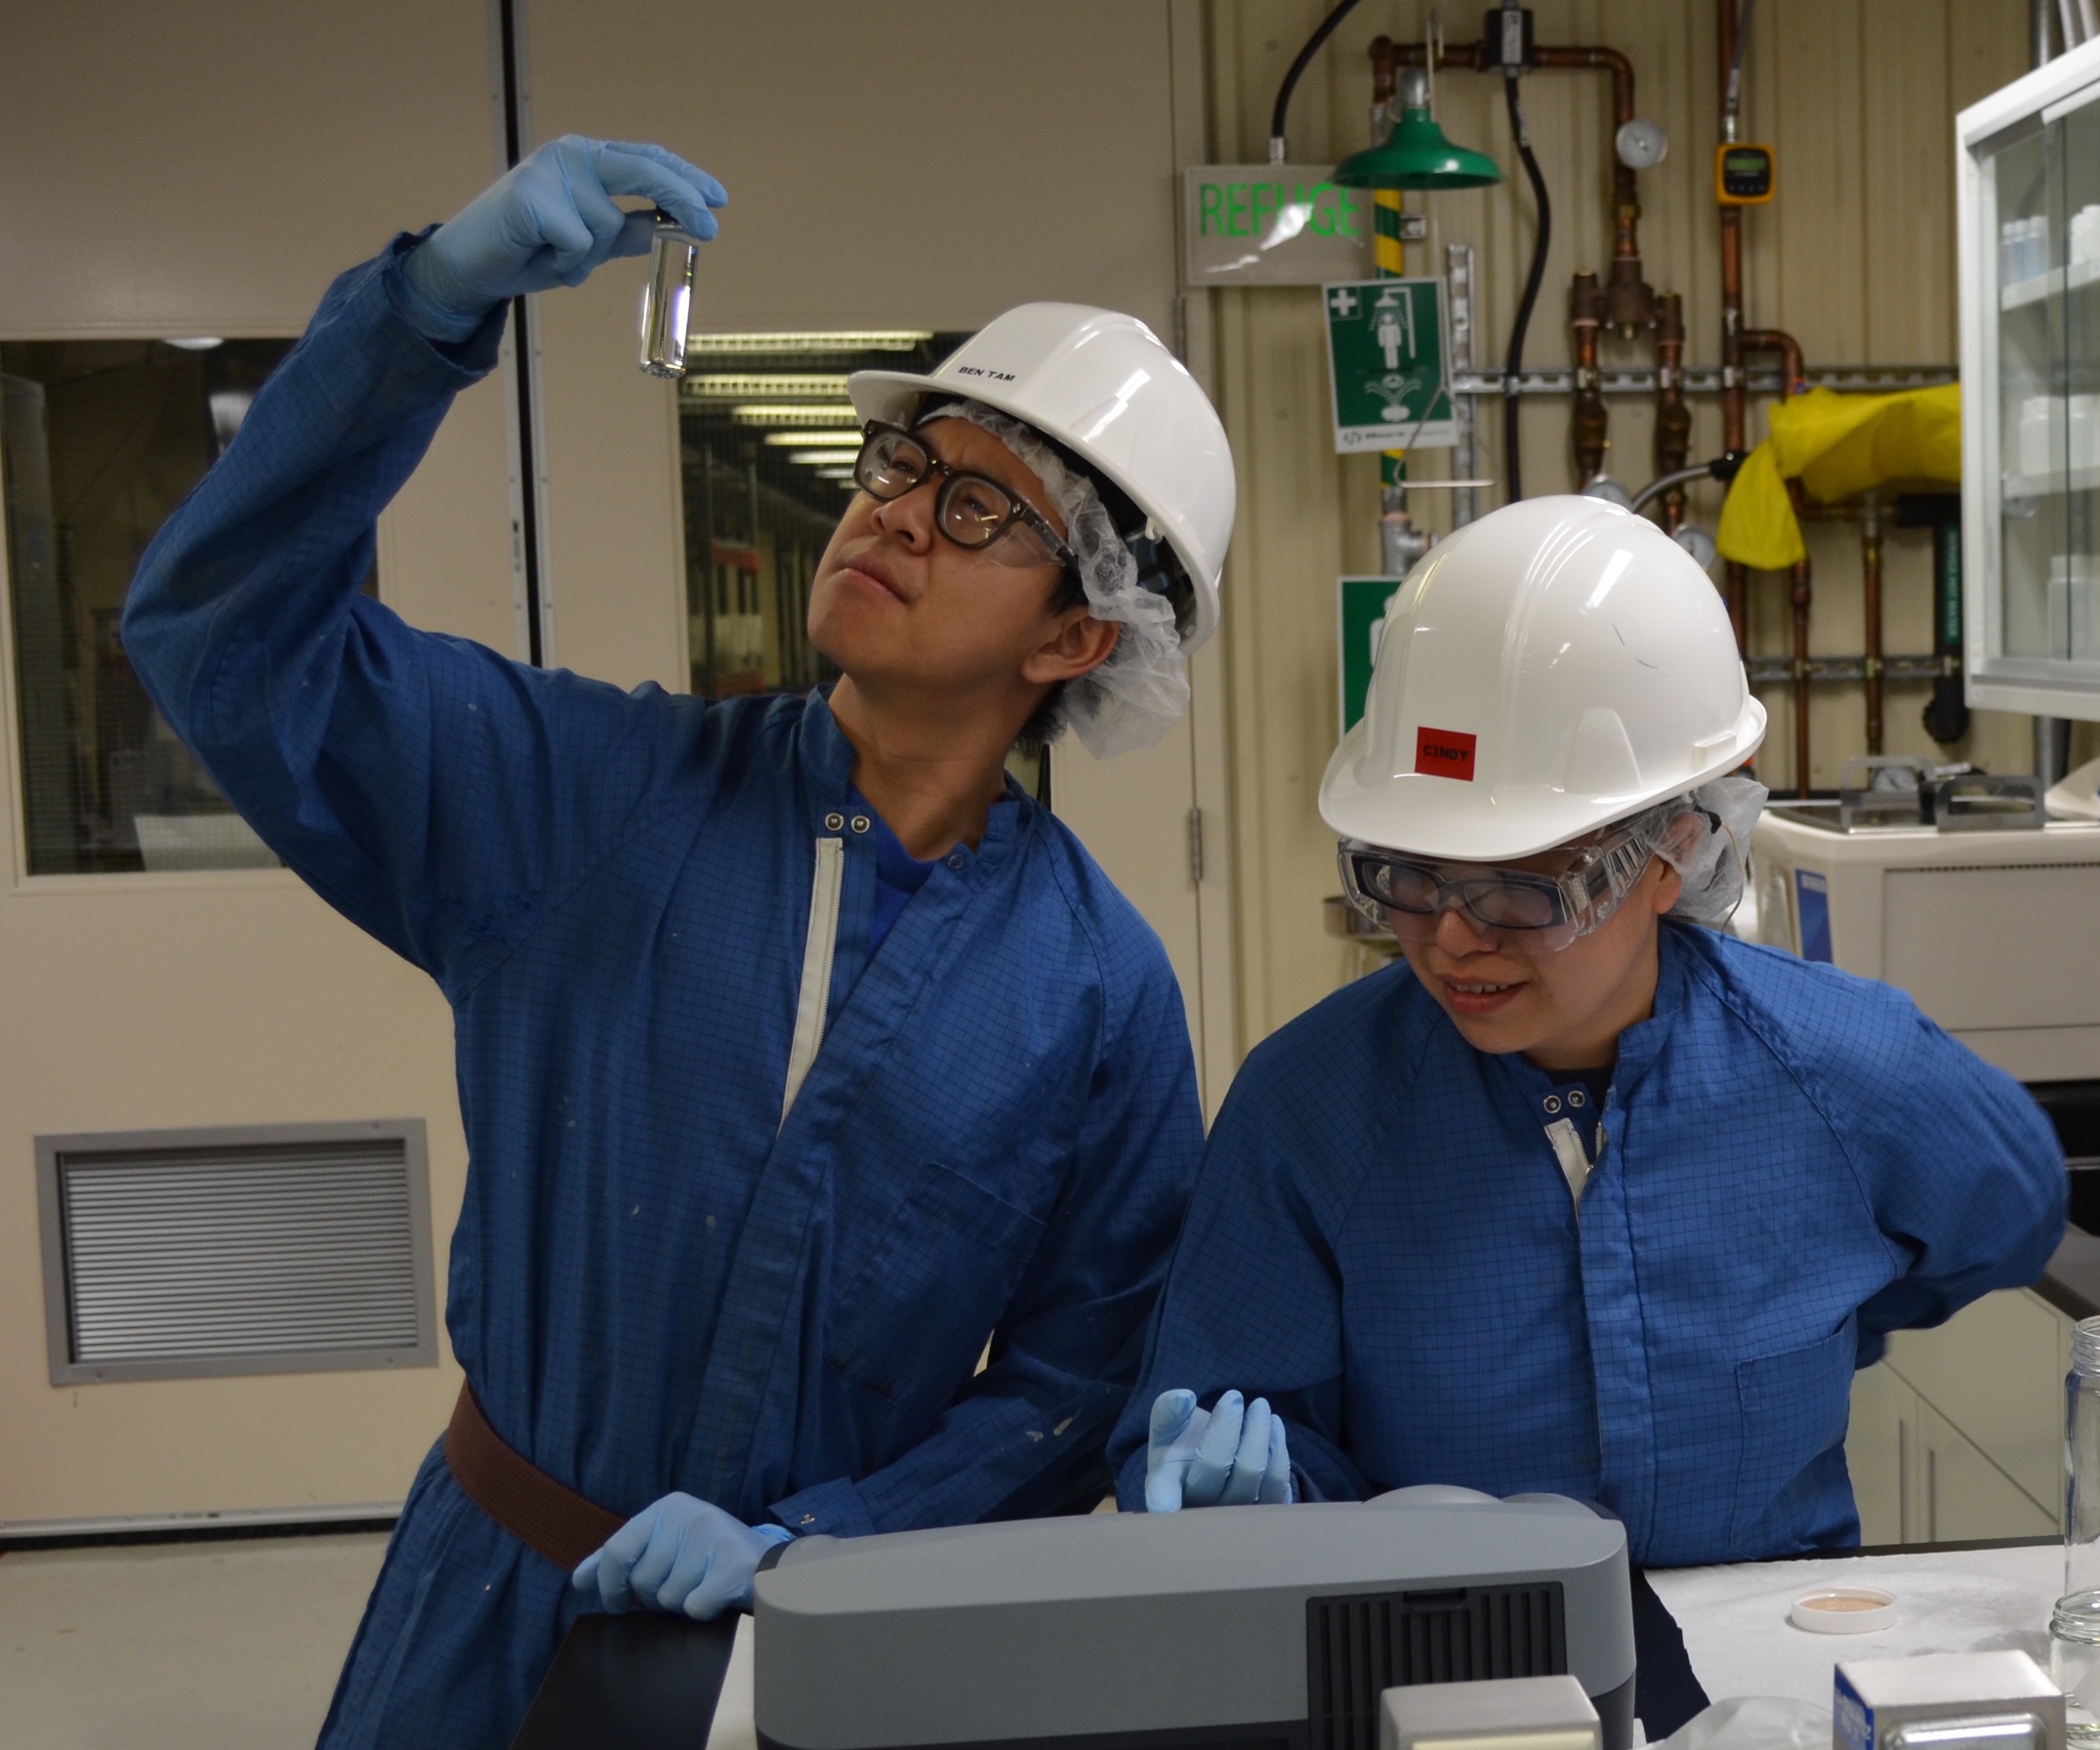 Two people wearing blue coveralls, white hardhats, latex gloves, safety glasses, and hairnets are working in a room with scientific equipment. One person is holding a tube of clear liquid up to the light and the other is pointing to a monitor.